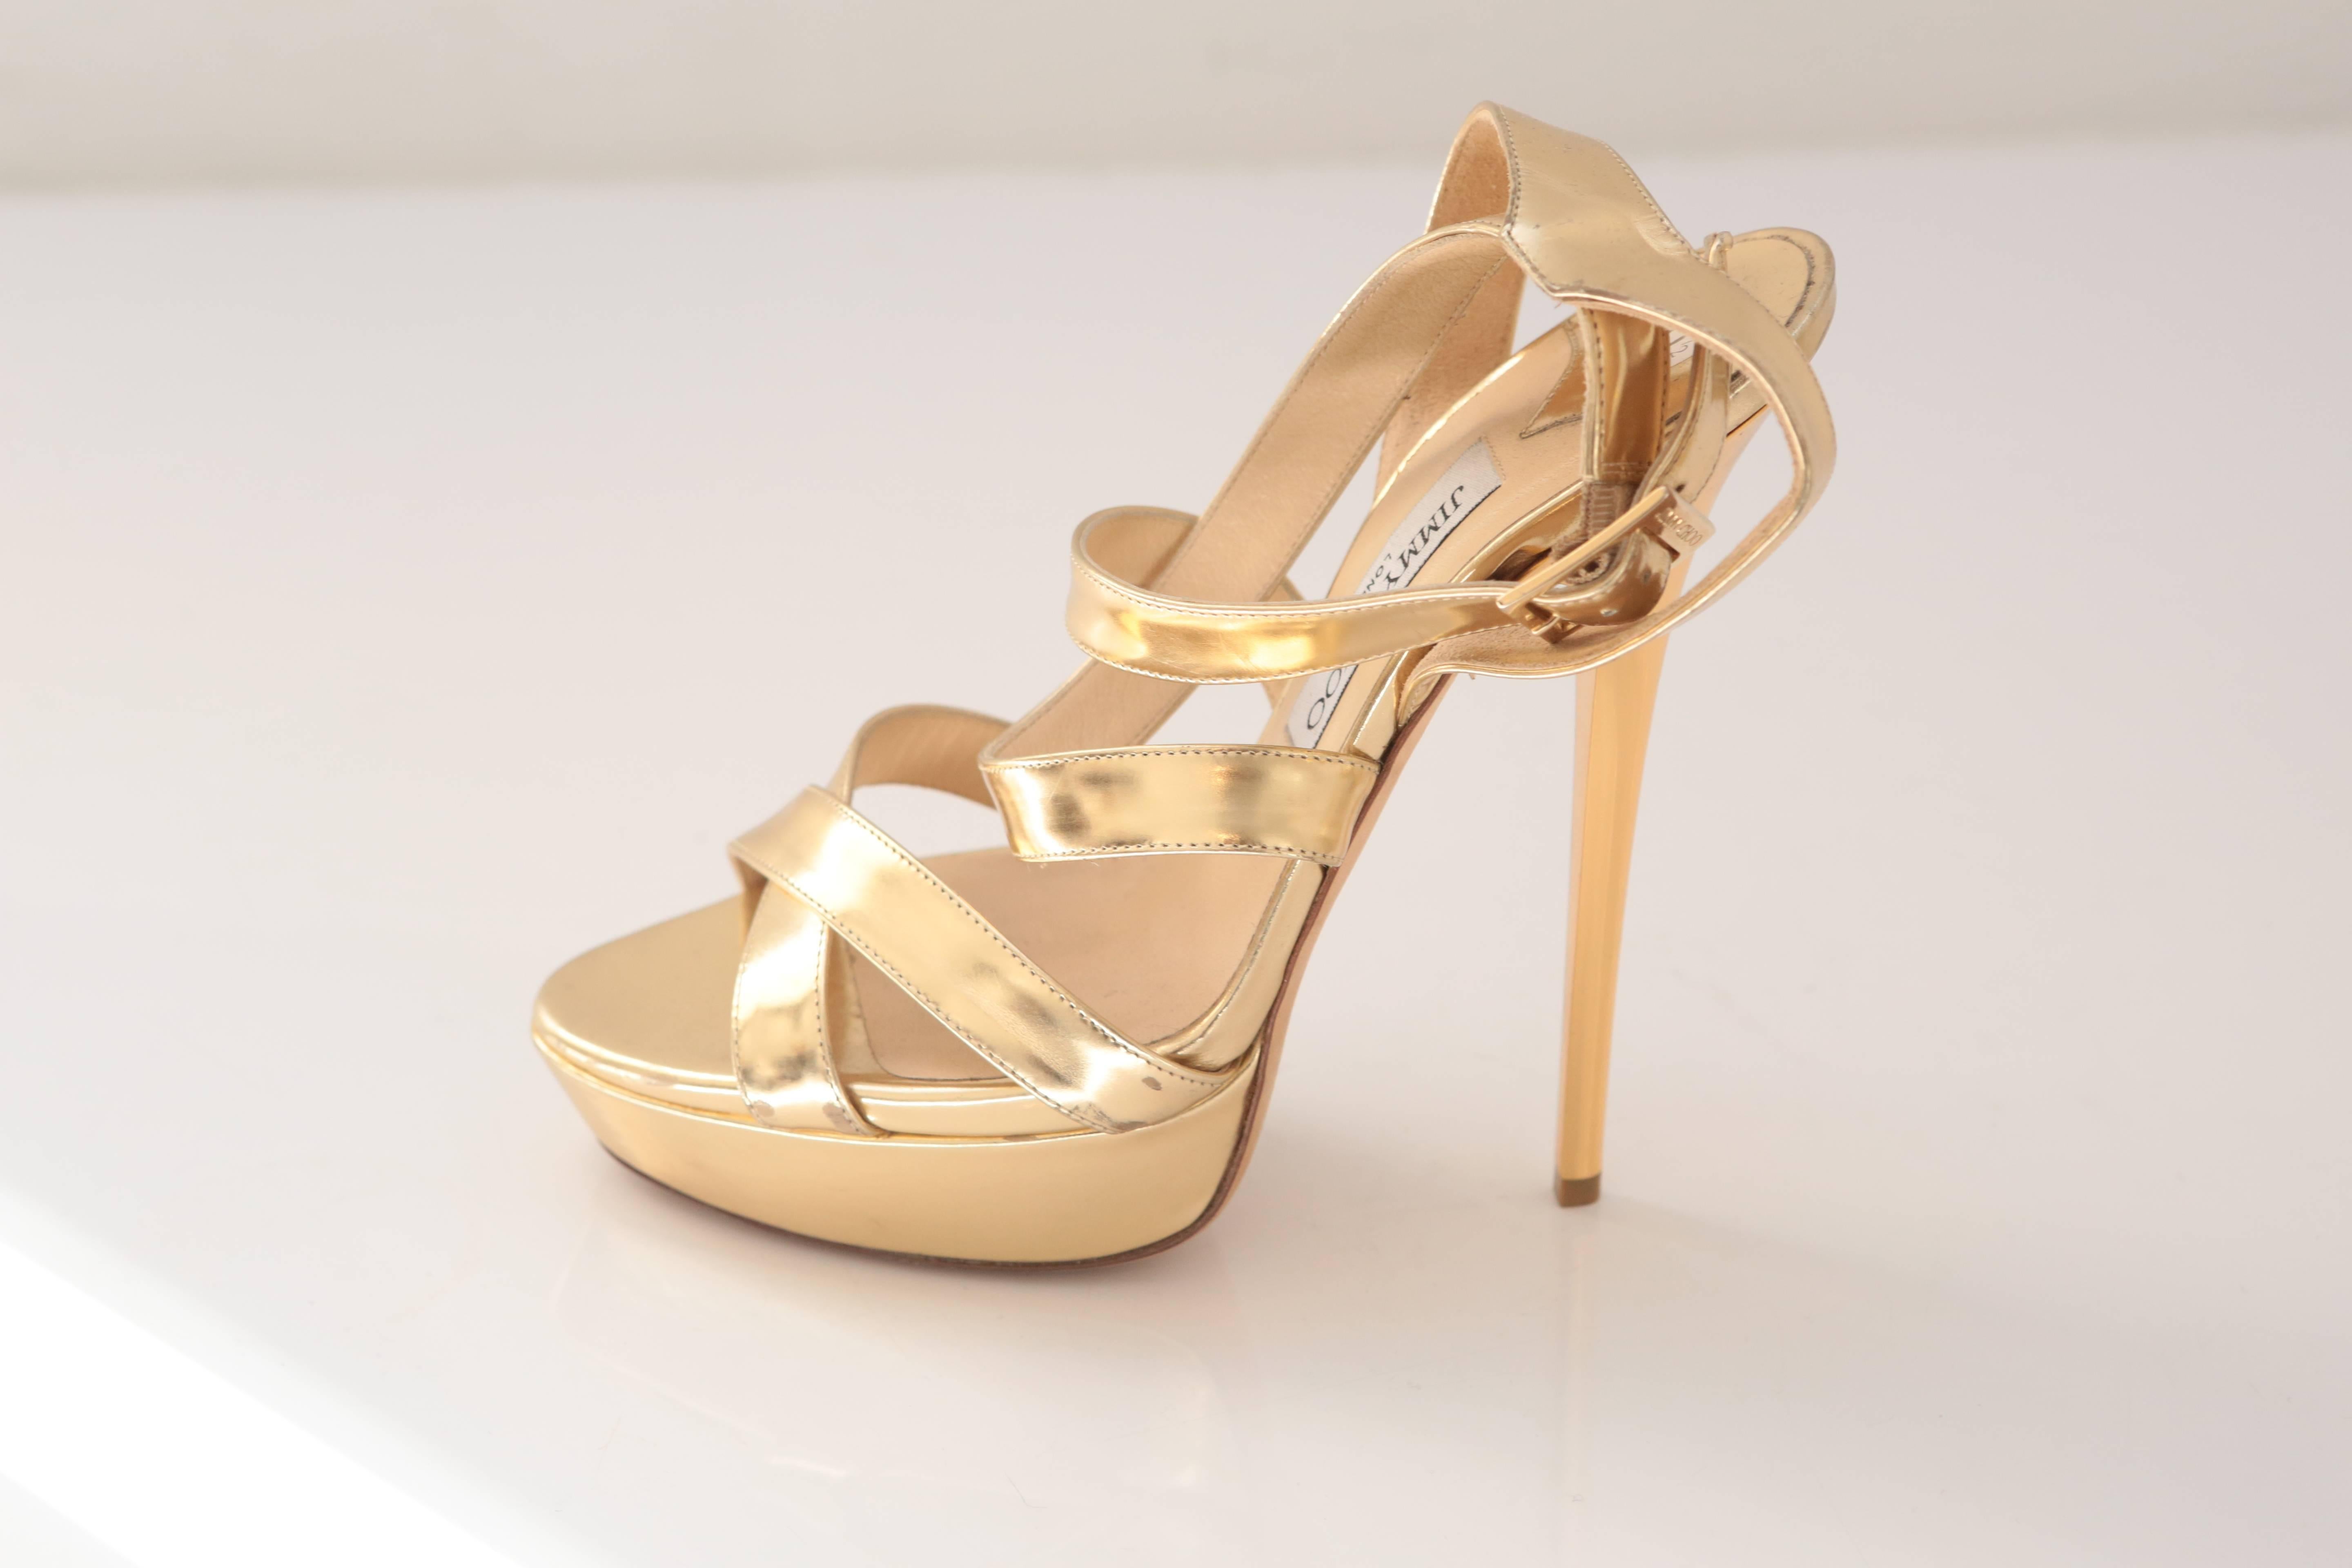 Must-have gold mirrored leather with crisscrossed straps over an open-toe. This platform sandal is a coveted piece among Manolo lovers!